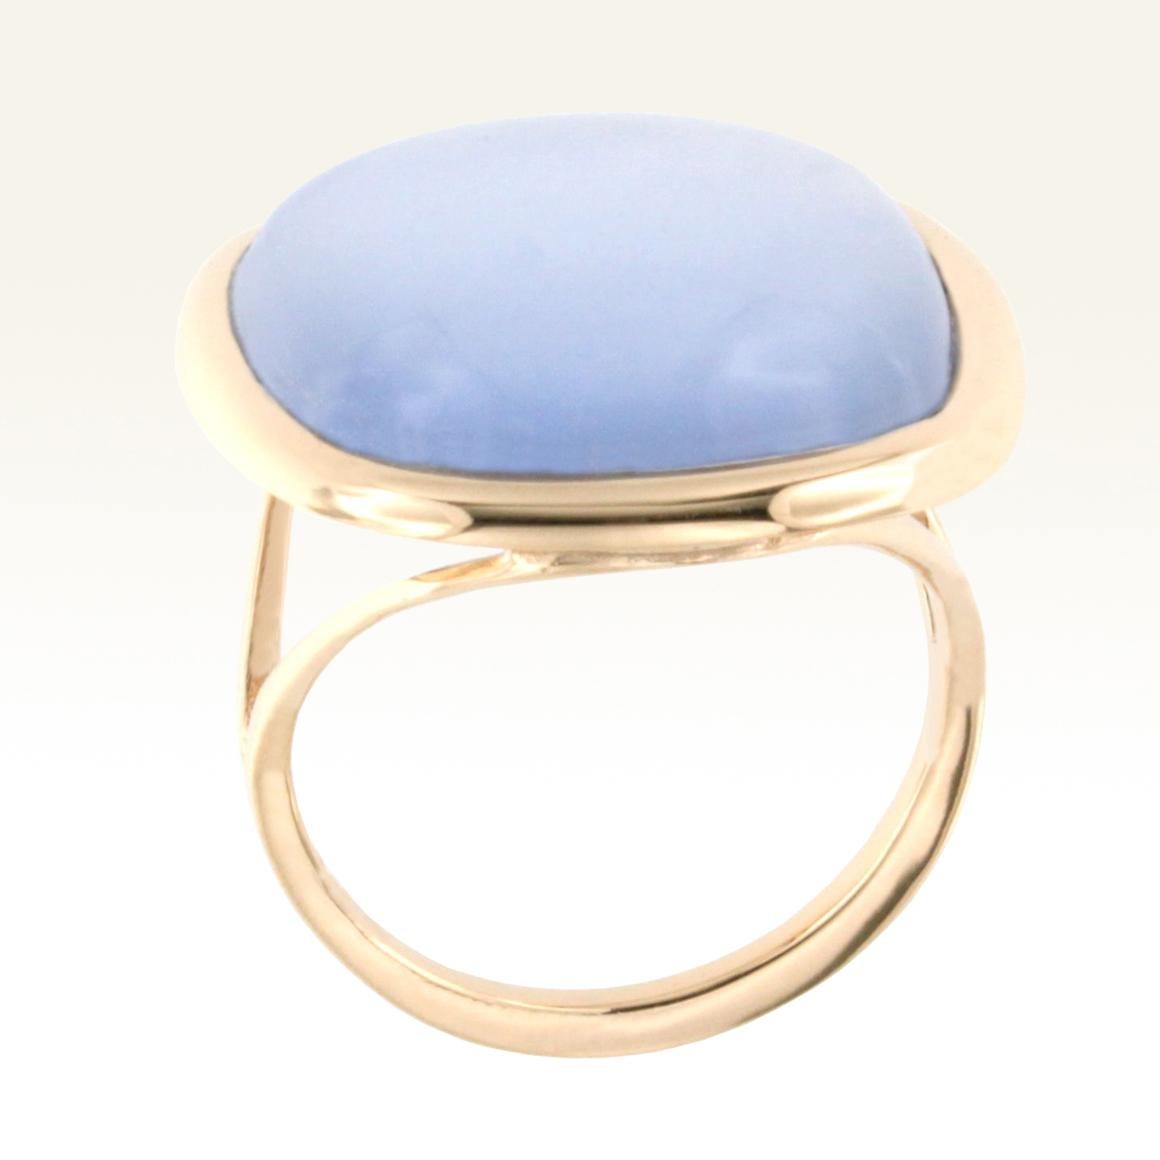 Ring 18k rose gold with doublette stone (Mother of Pearl and Blue Topaz) in square cabochon cut (size: mm20x20)
This ring is part of the new collection 